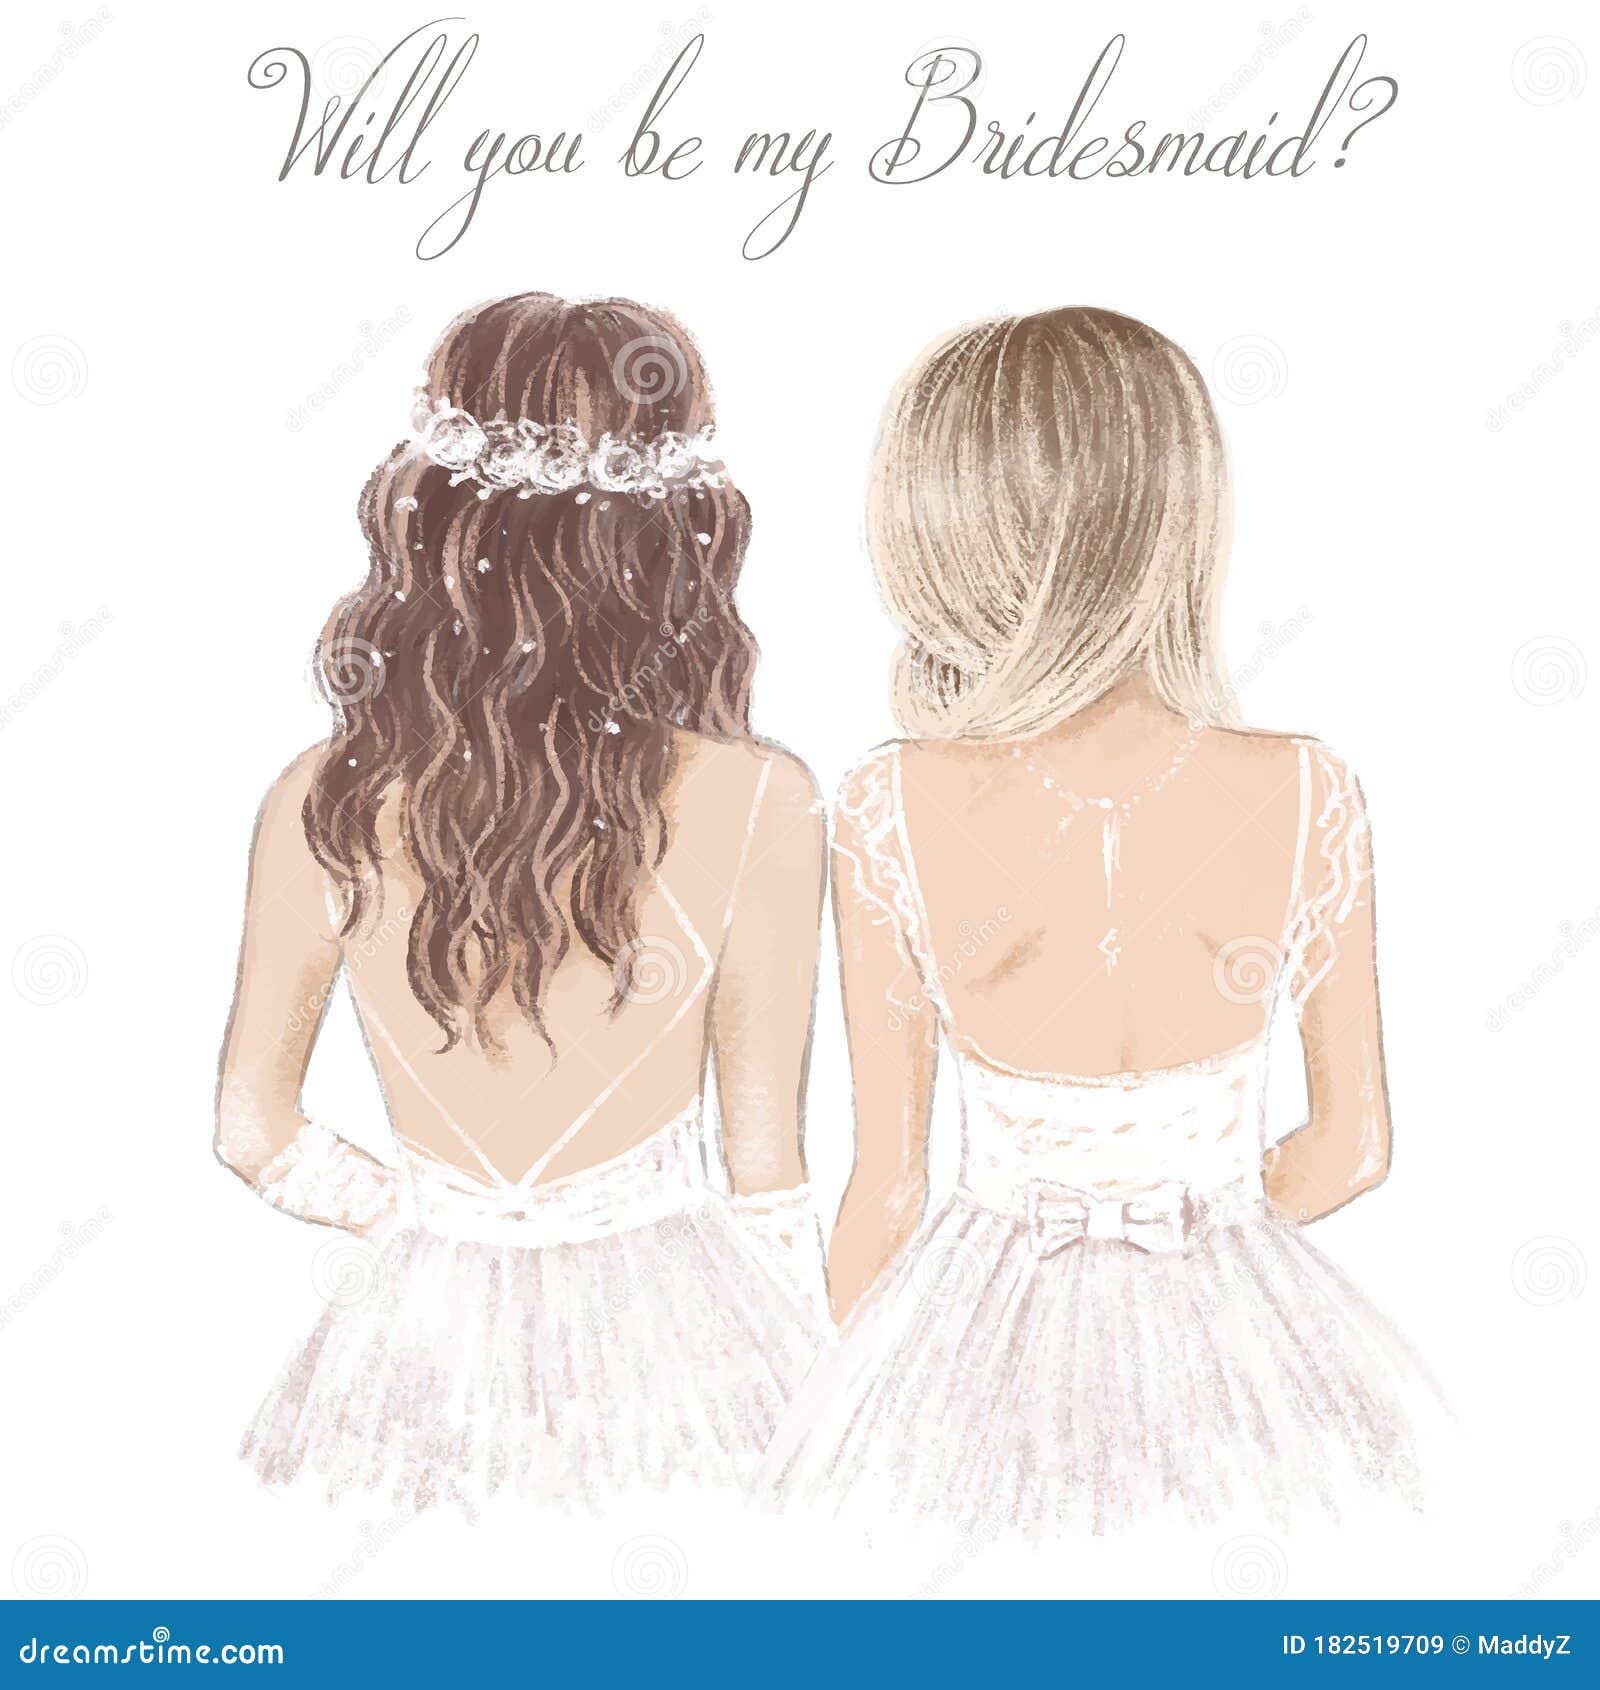 Bridesmaid Illustrations | Unique Modern and Vintage Style Stock  Illustrations for Licensing | CSA Images